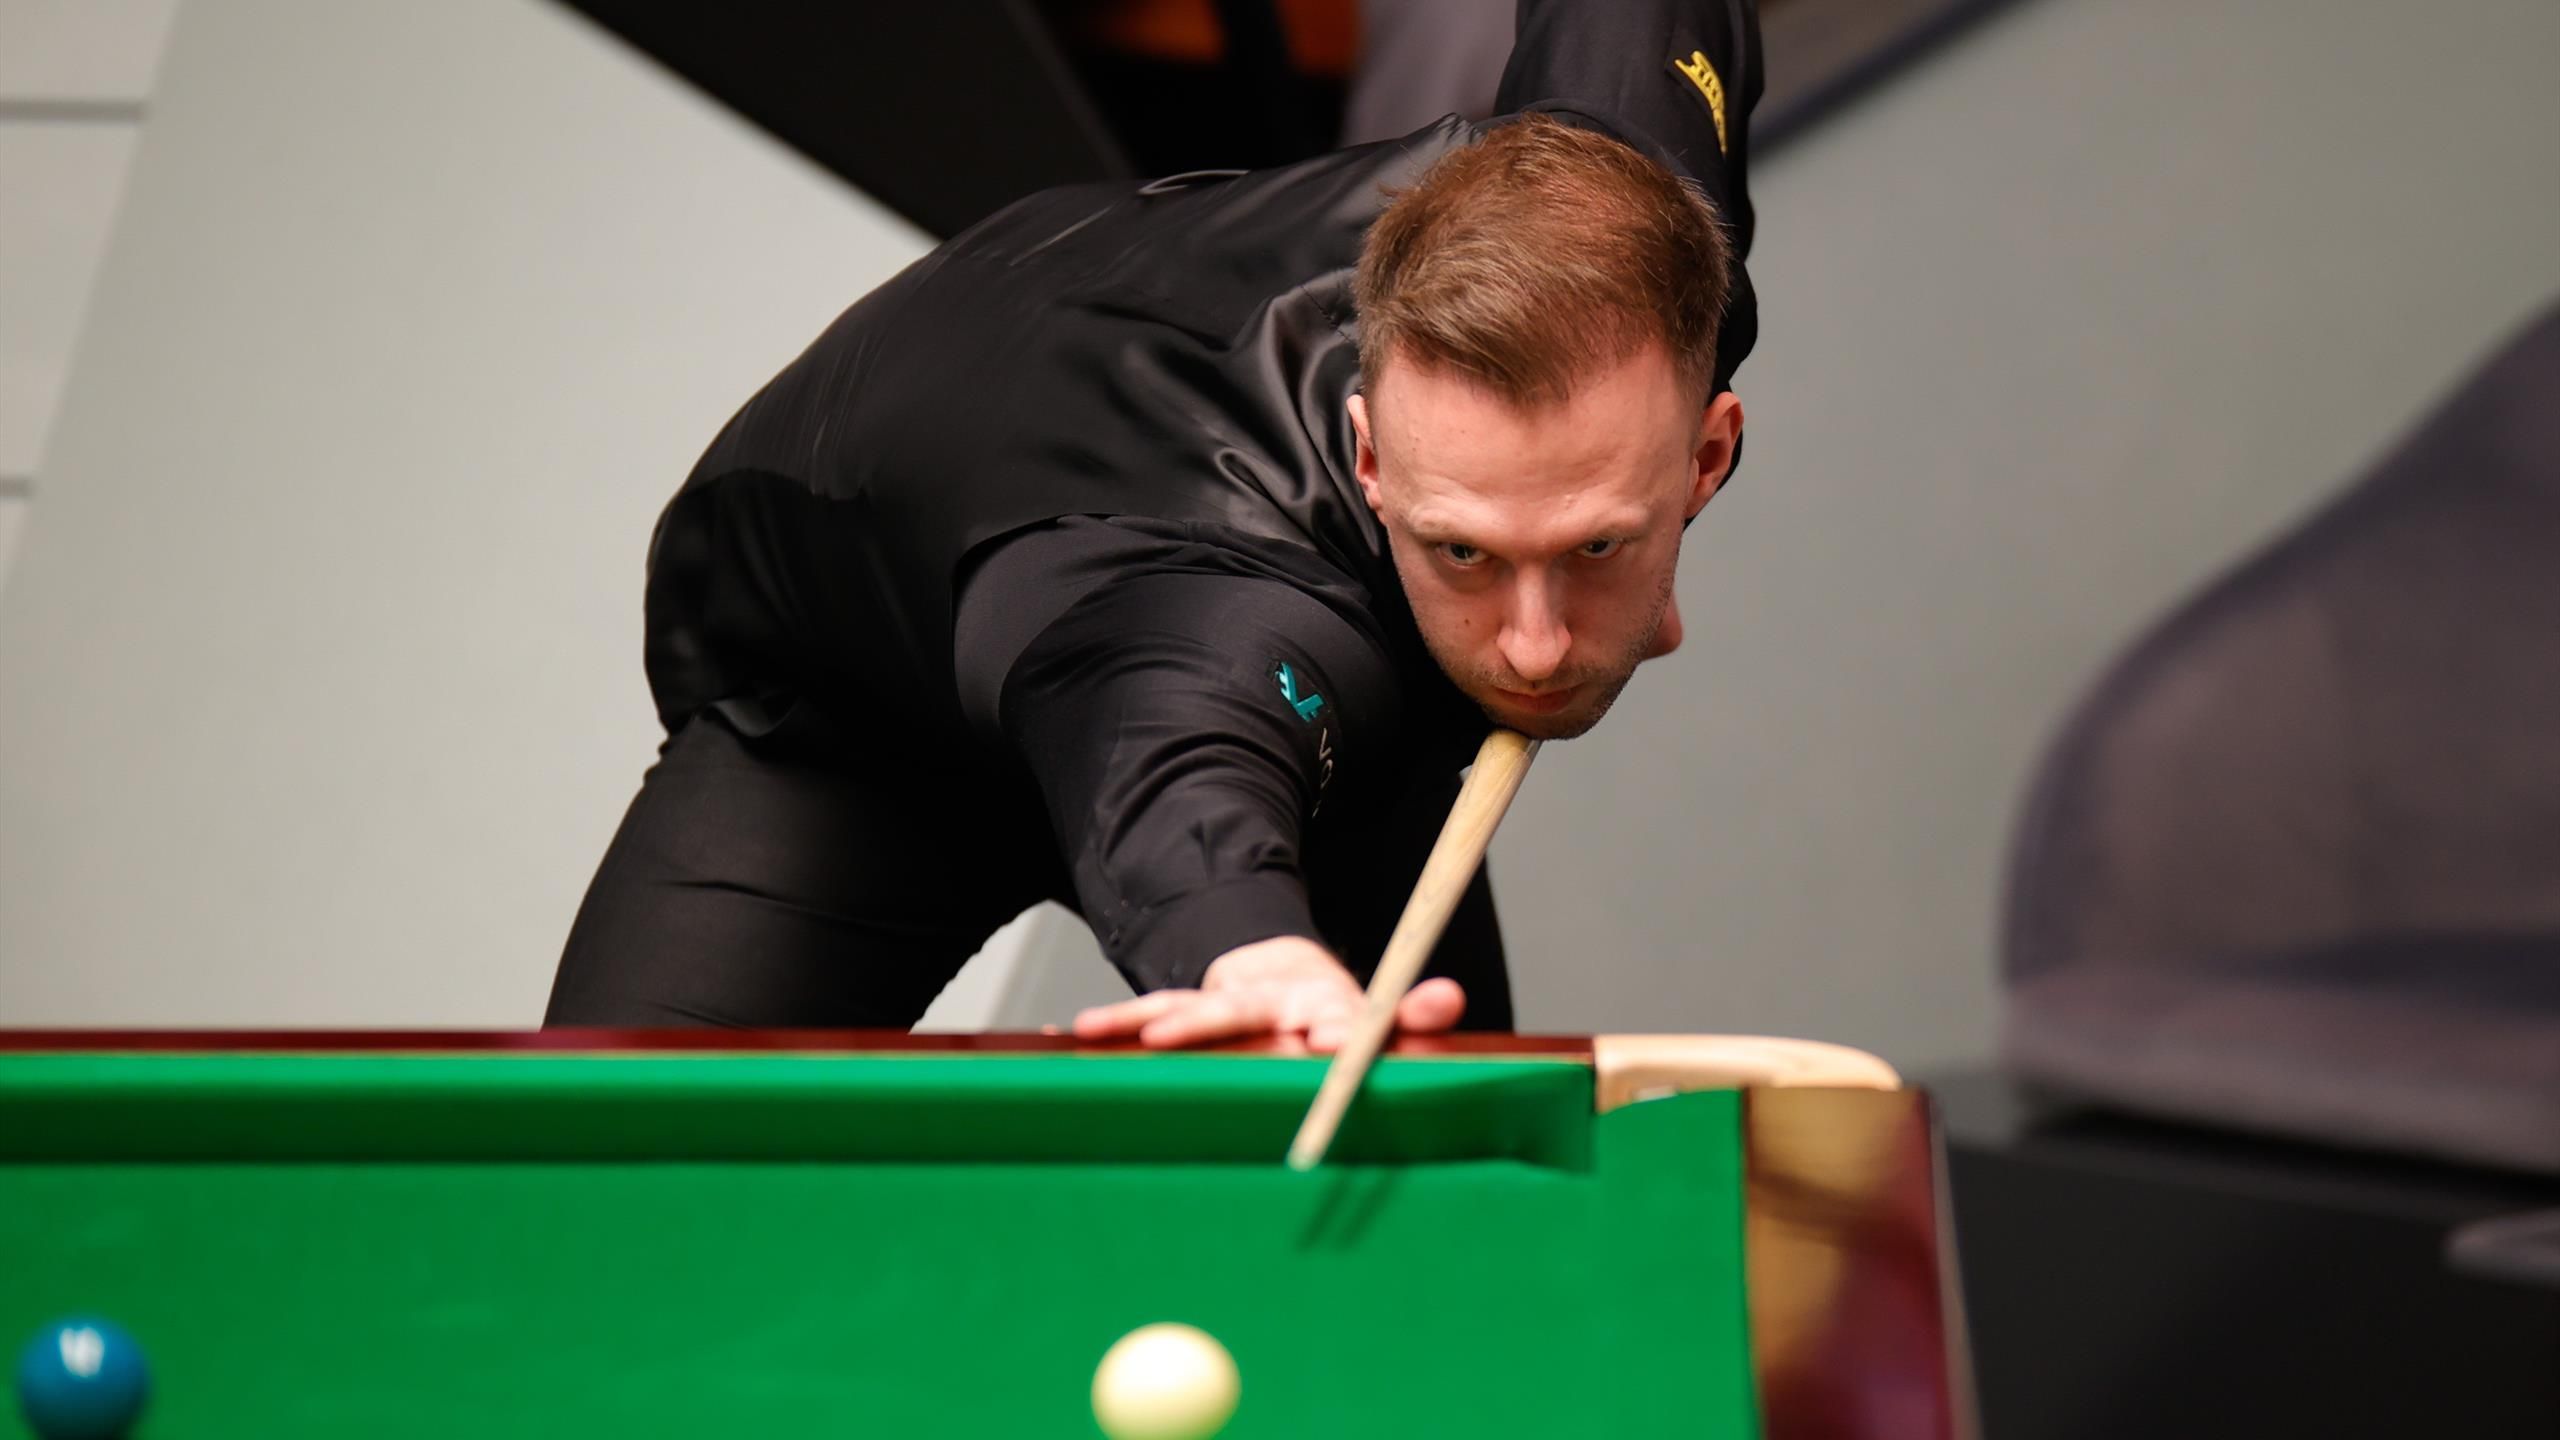 European Masters snooker 2023 Latest scores, results, schedule, order of play as Barry Hawkins v Judd Trump in final